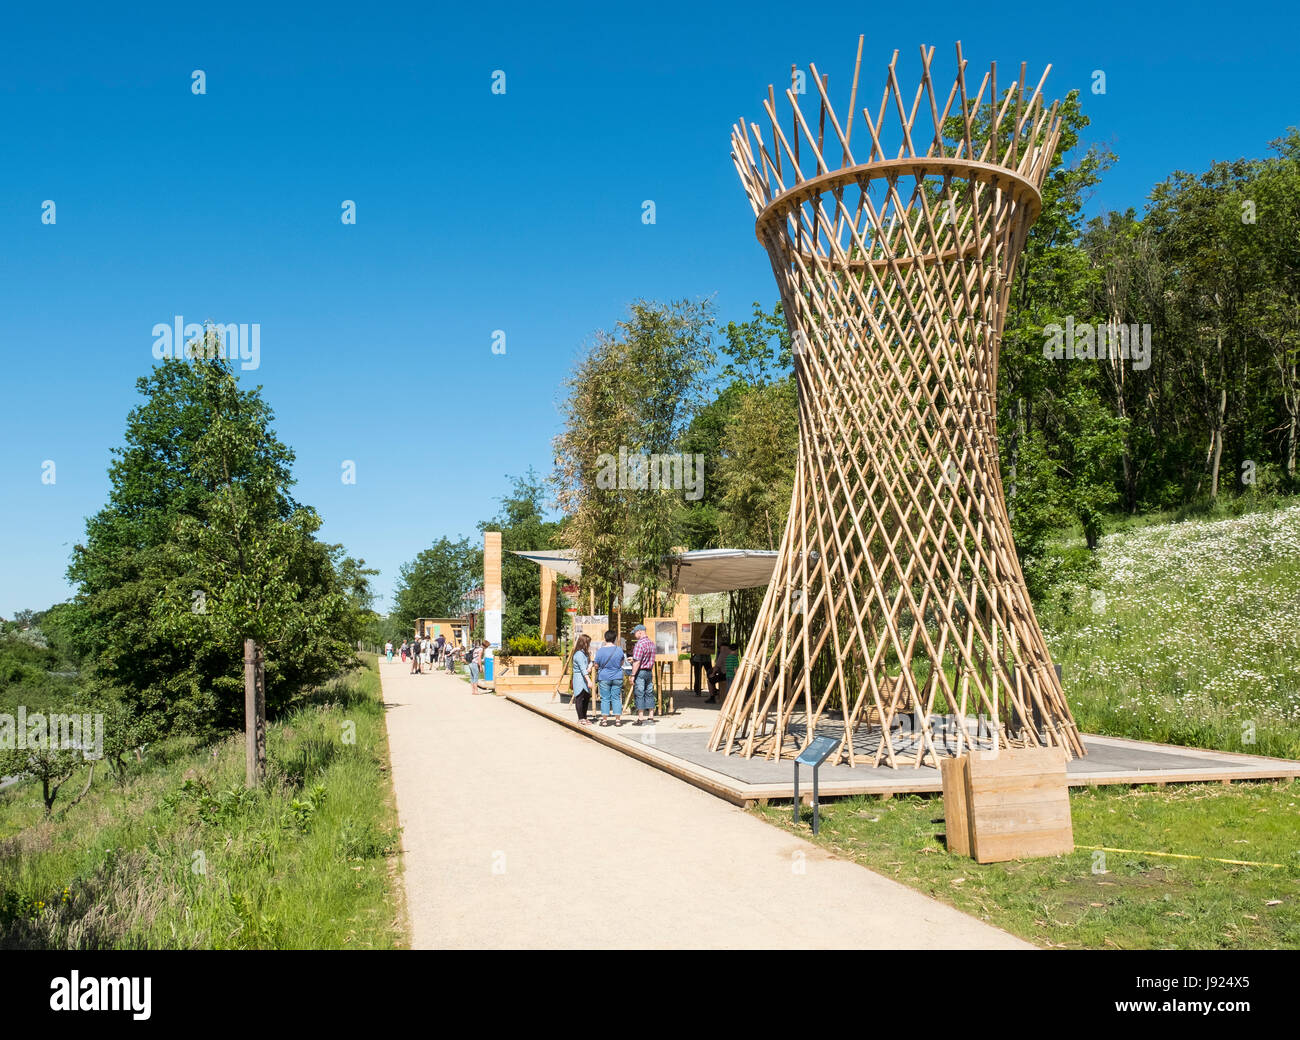 Bamboo Structure Stock Photos Bamboo Structure Stock Images Alamy